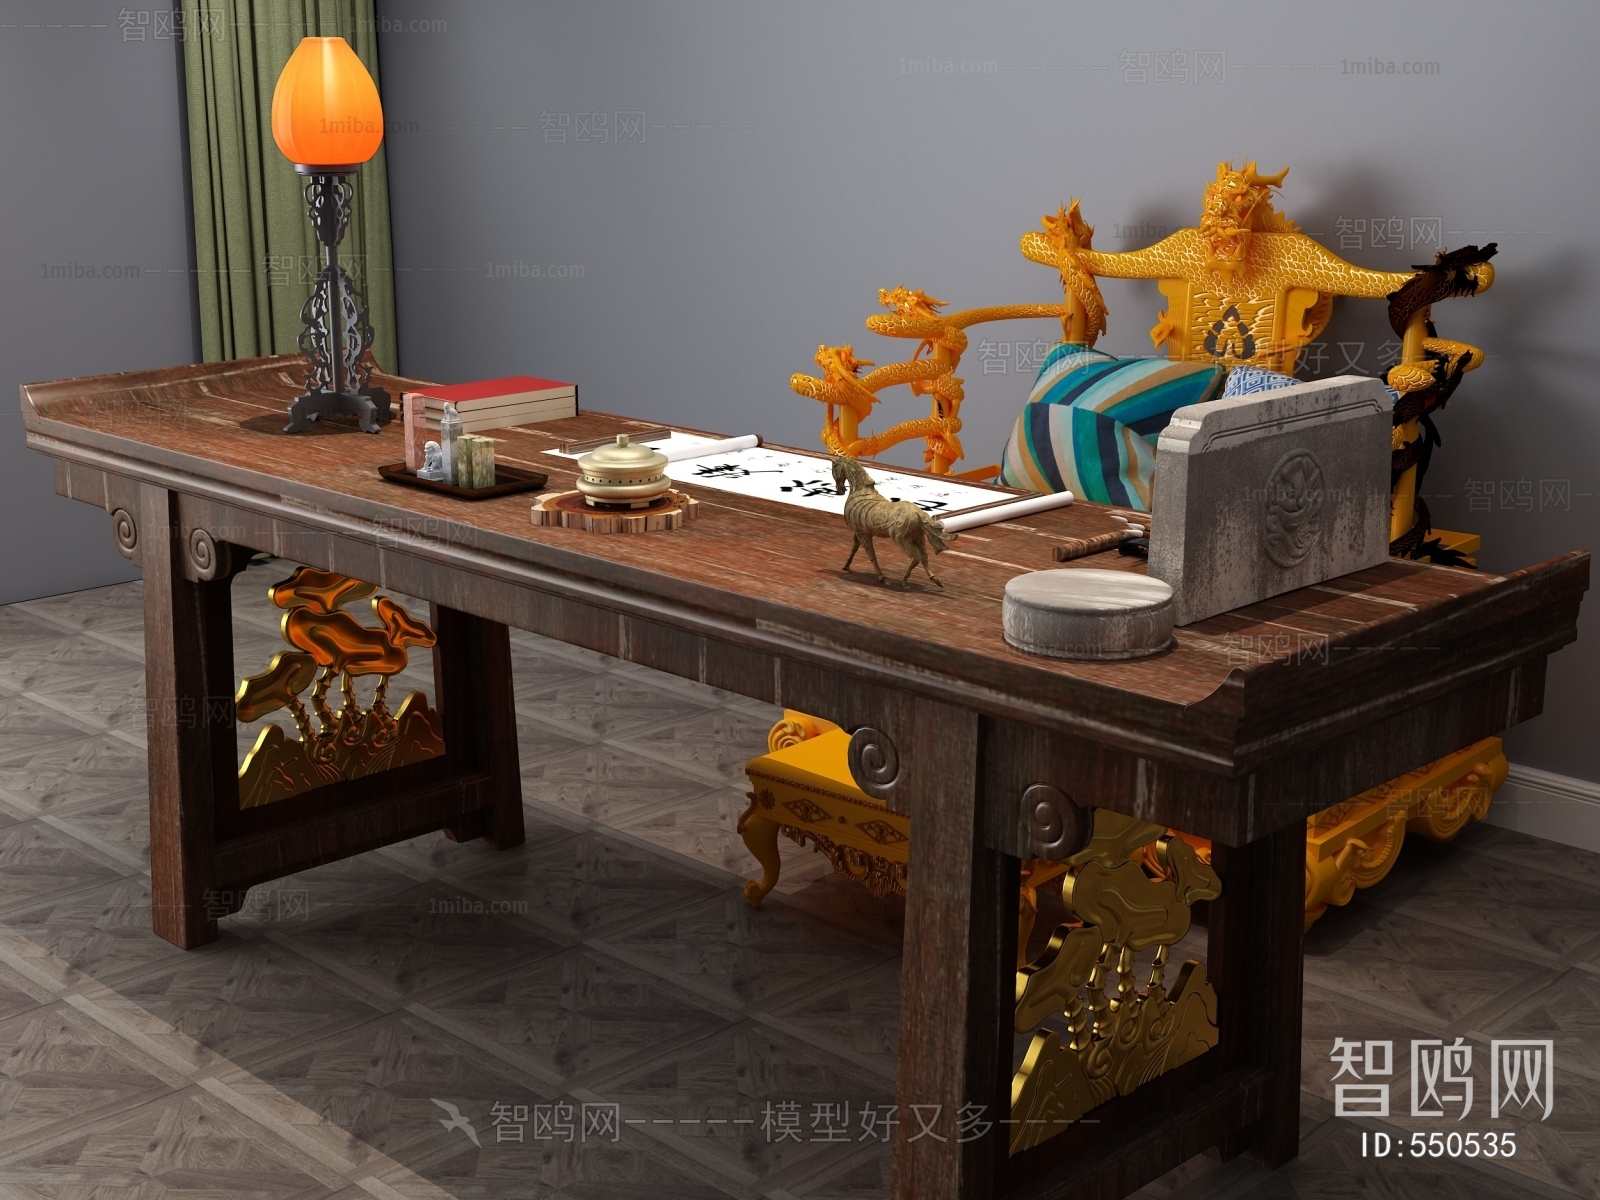 New Chinese Style Office Table